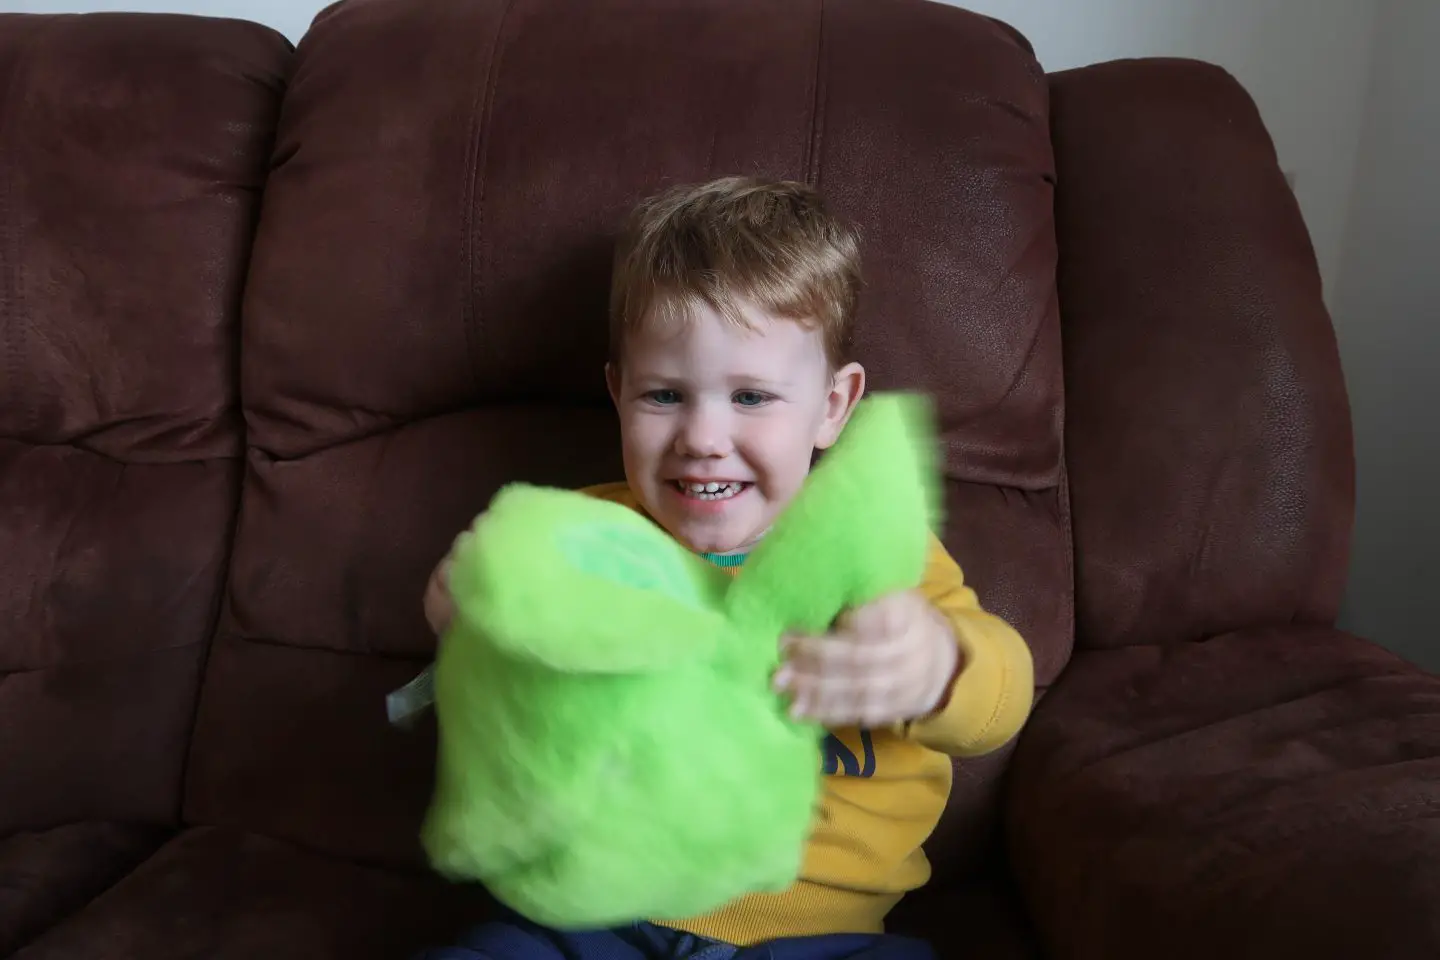 A young boy sat on a brown sofa and holding a green fluffy toy out in front of him. He is smiling at the toy